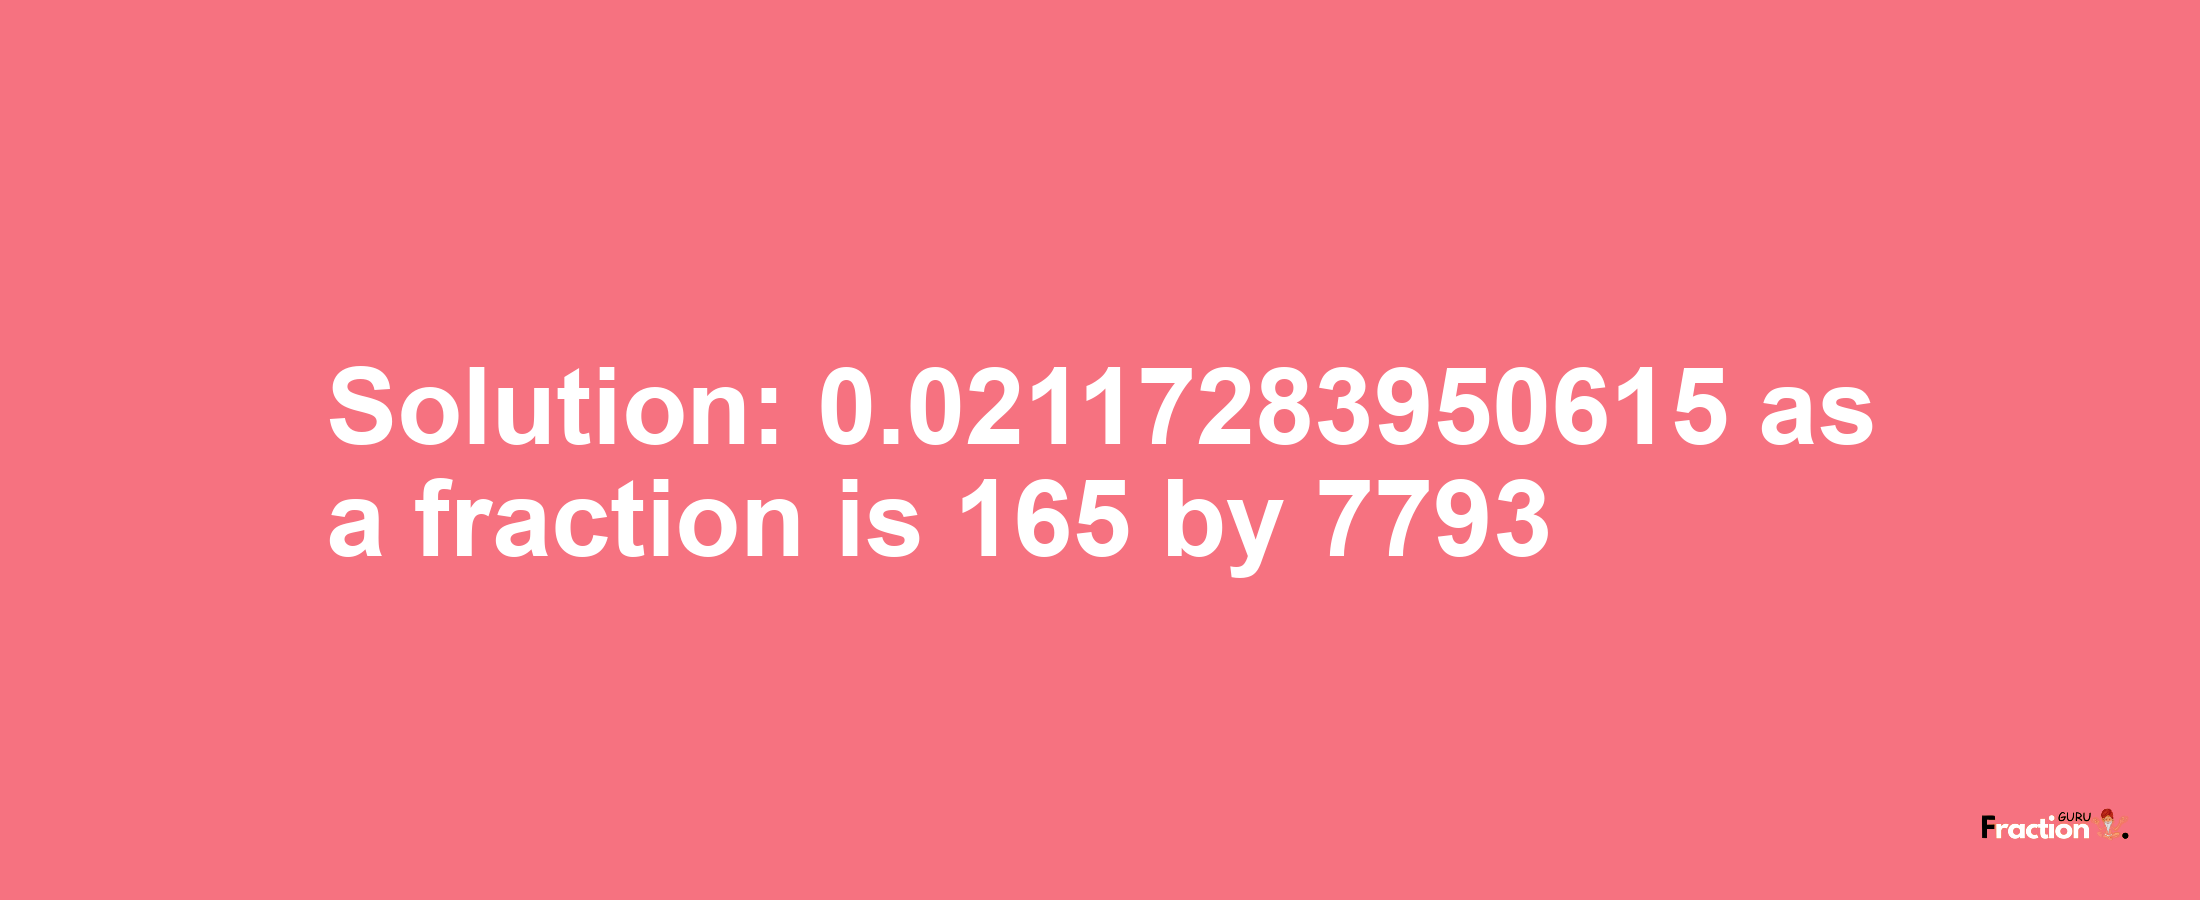 Solution:0.02117283950615 as a fraction is 165/7793